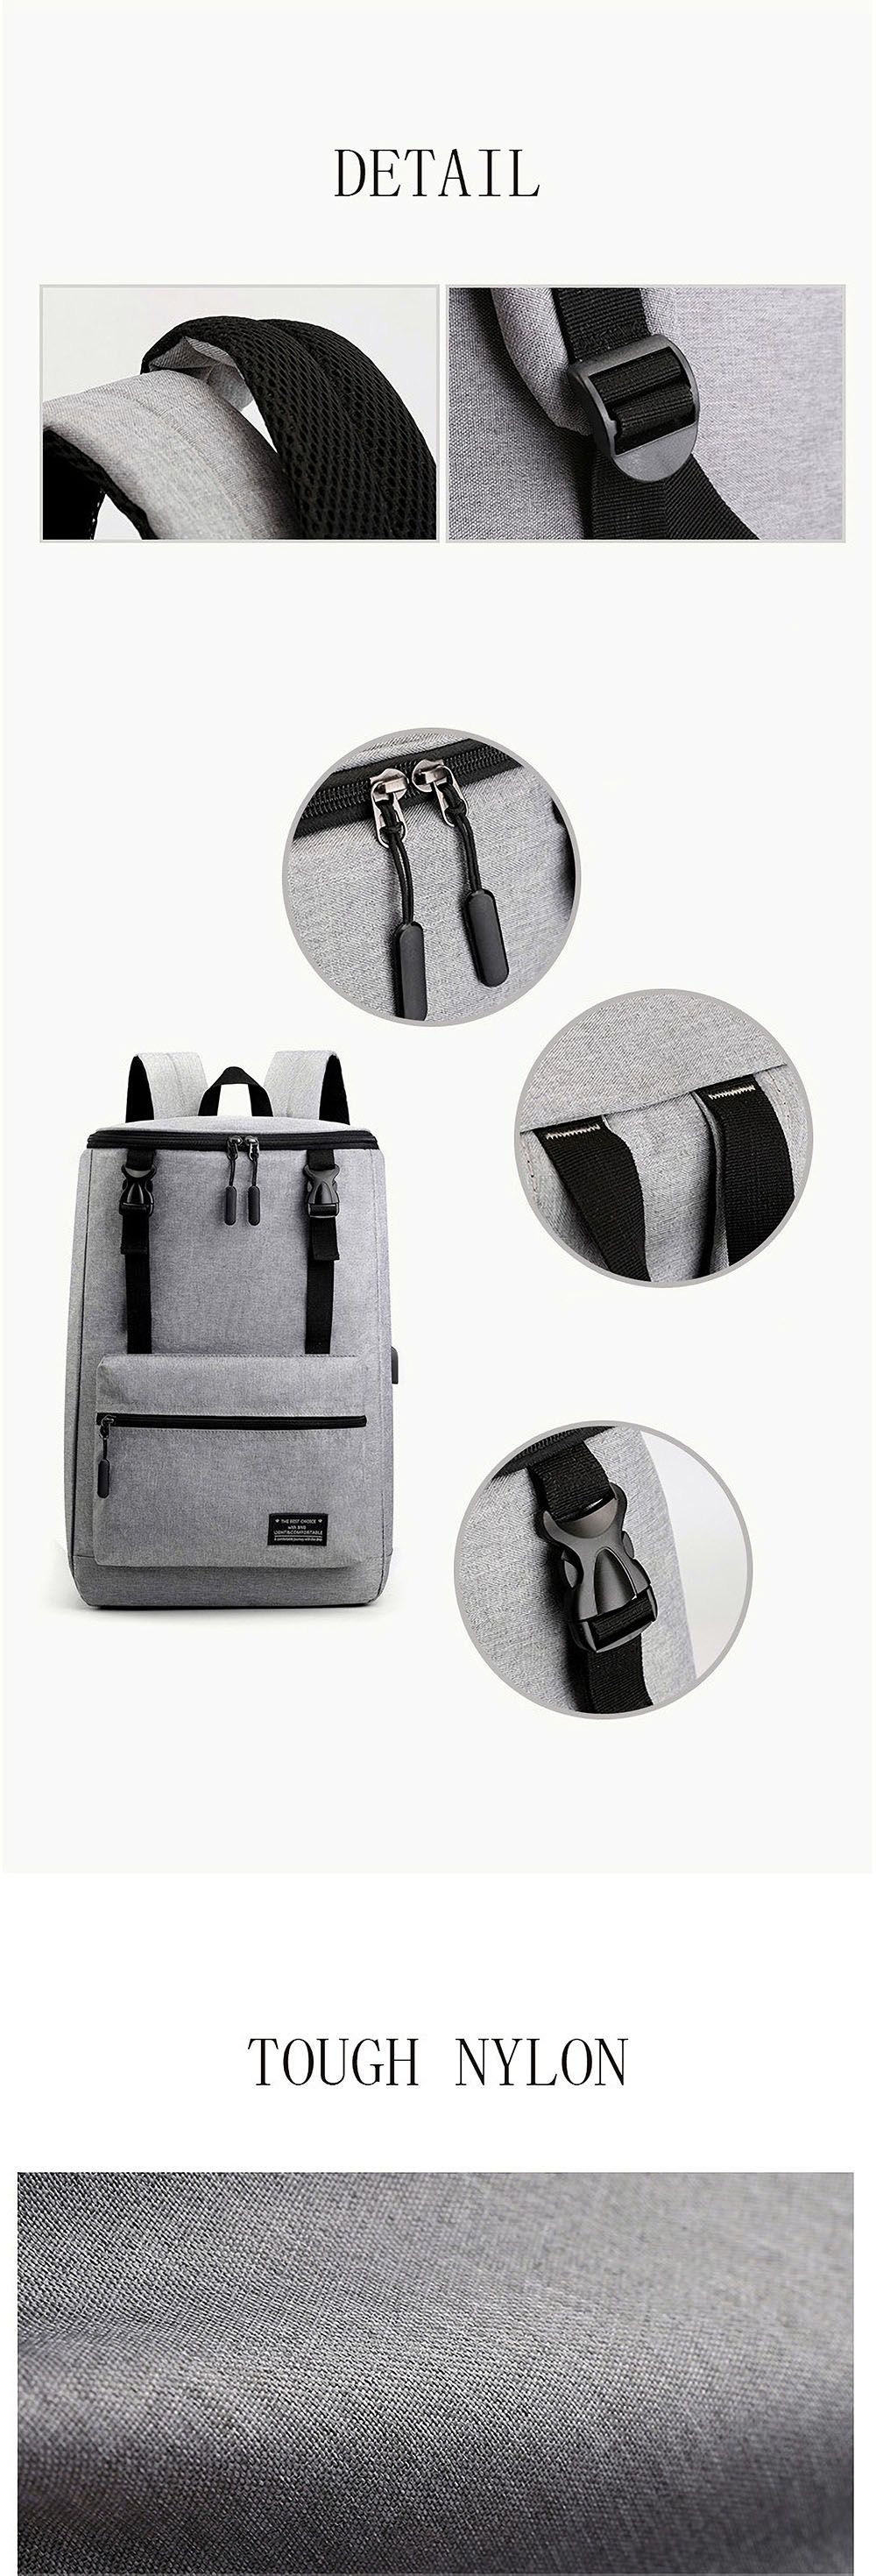 17-inch-Laptop-Bag-with-USB-Charging-Port--Shoulder-Bag-Classic-Business-Outdoor-Stylish-Backpack-Tr-1586747